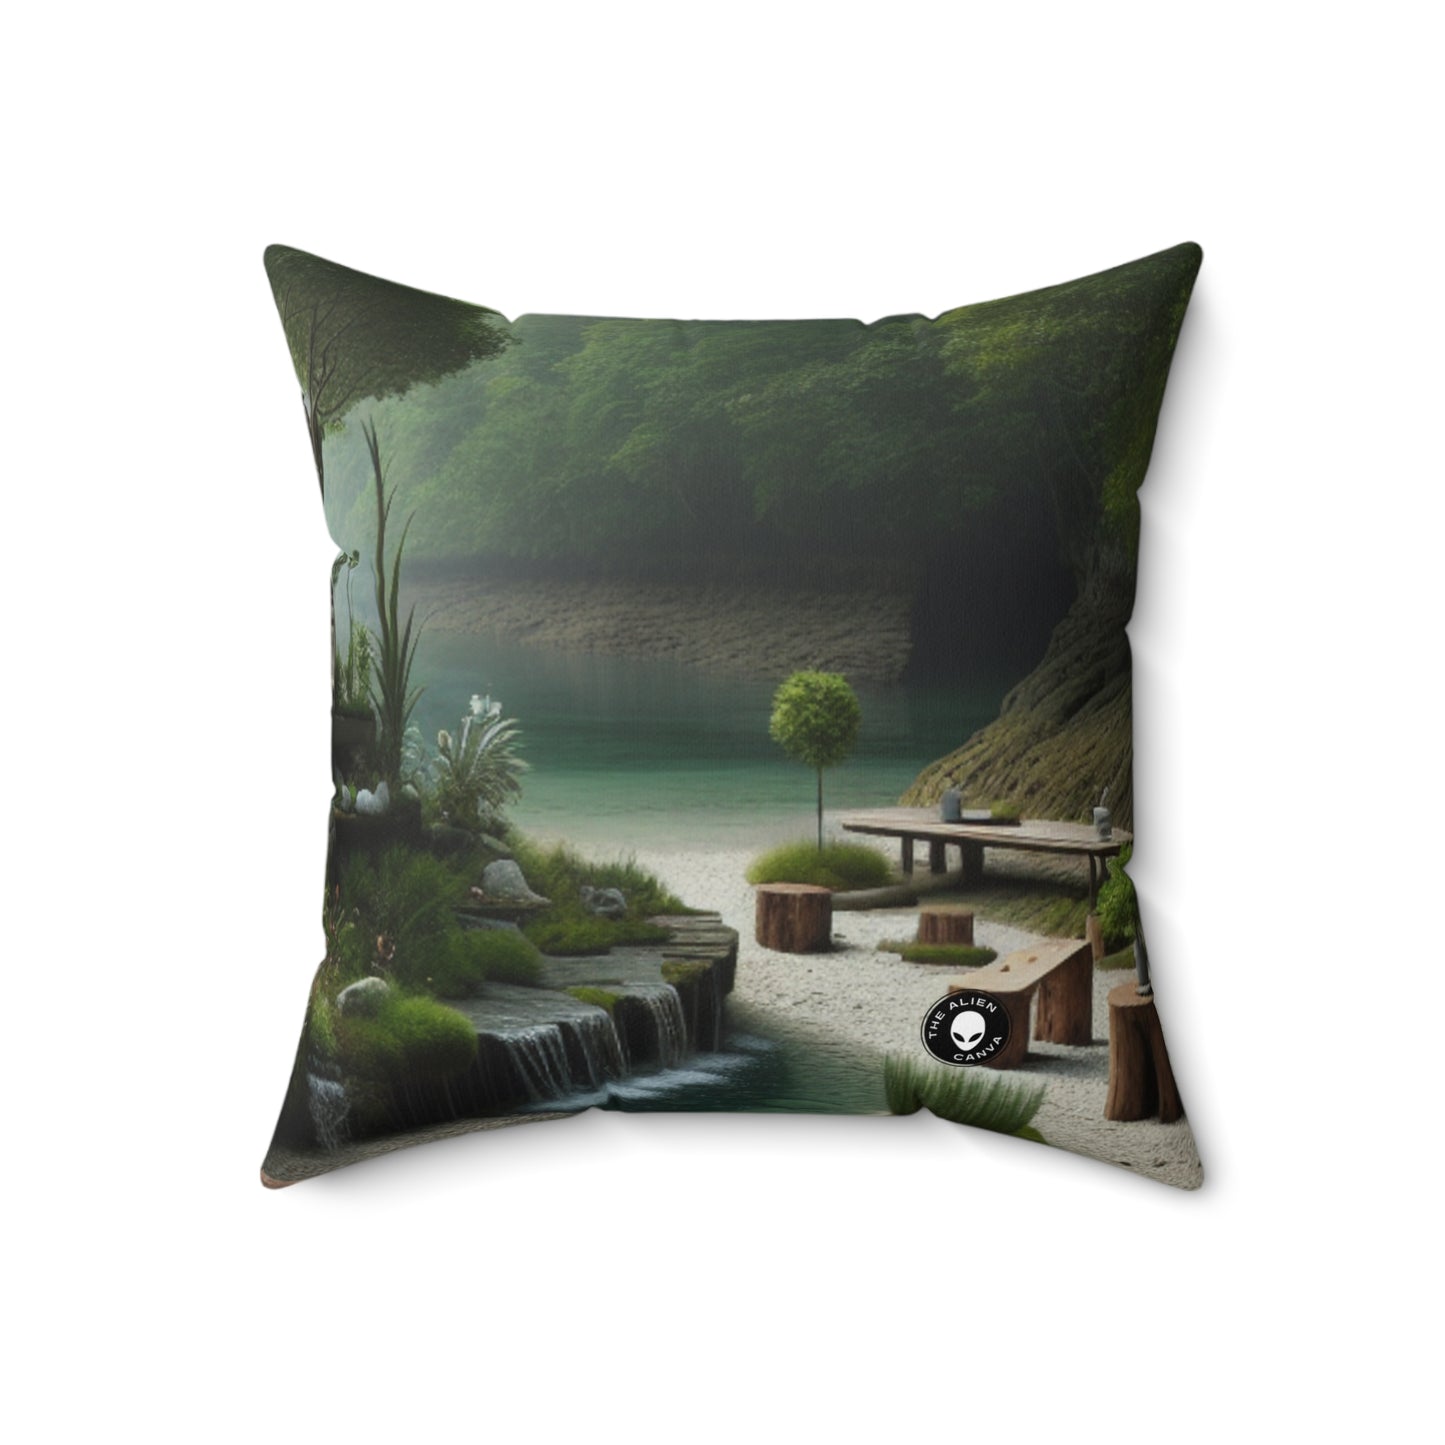 "Renewal Recycled: An Interactive Environmental Sculpture"- The Alien Spun Polyester Square Pillow Environmental Sculpture